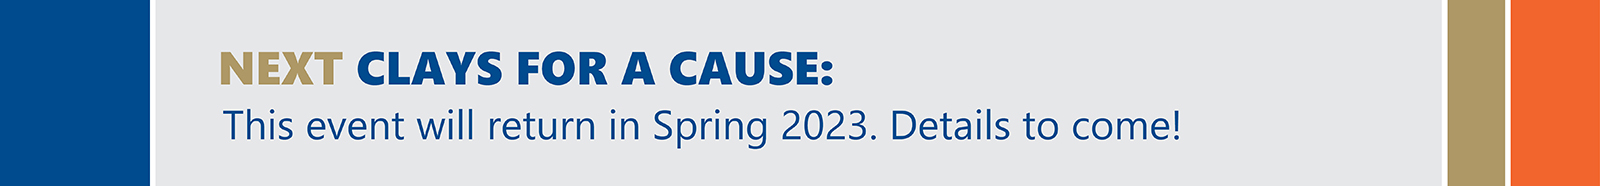 Clays for a Cause will return in Spring 2023. Details to come.